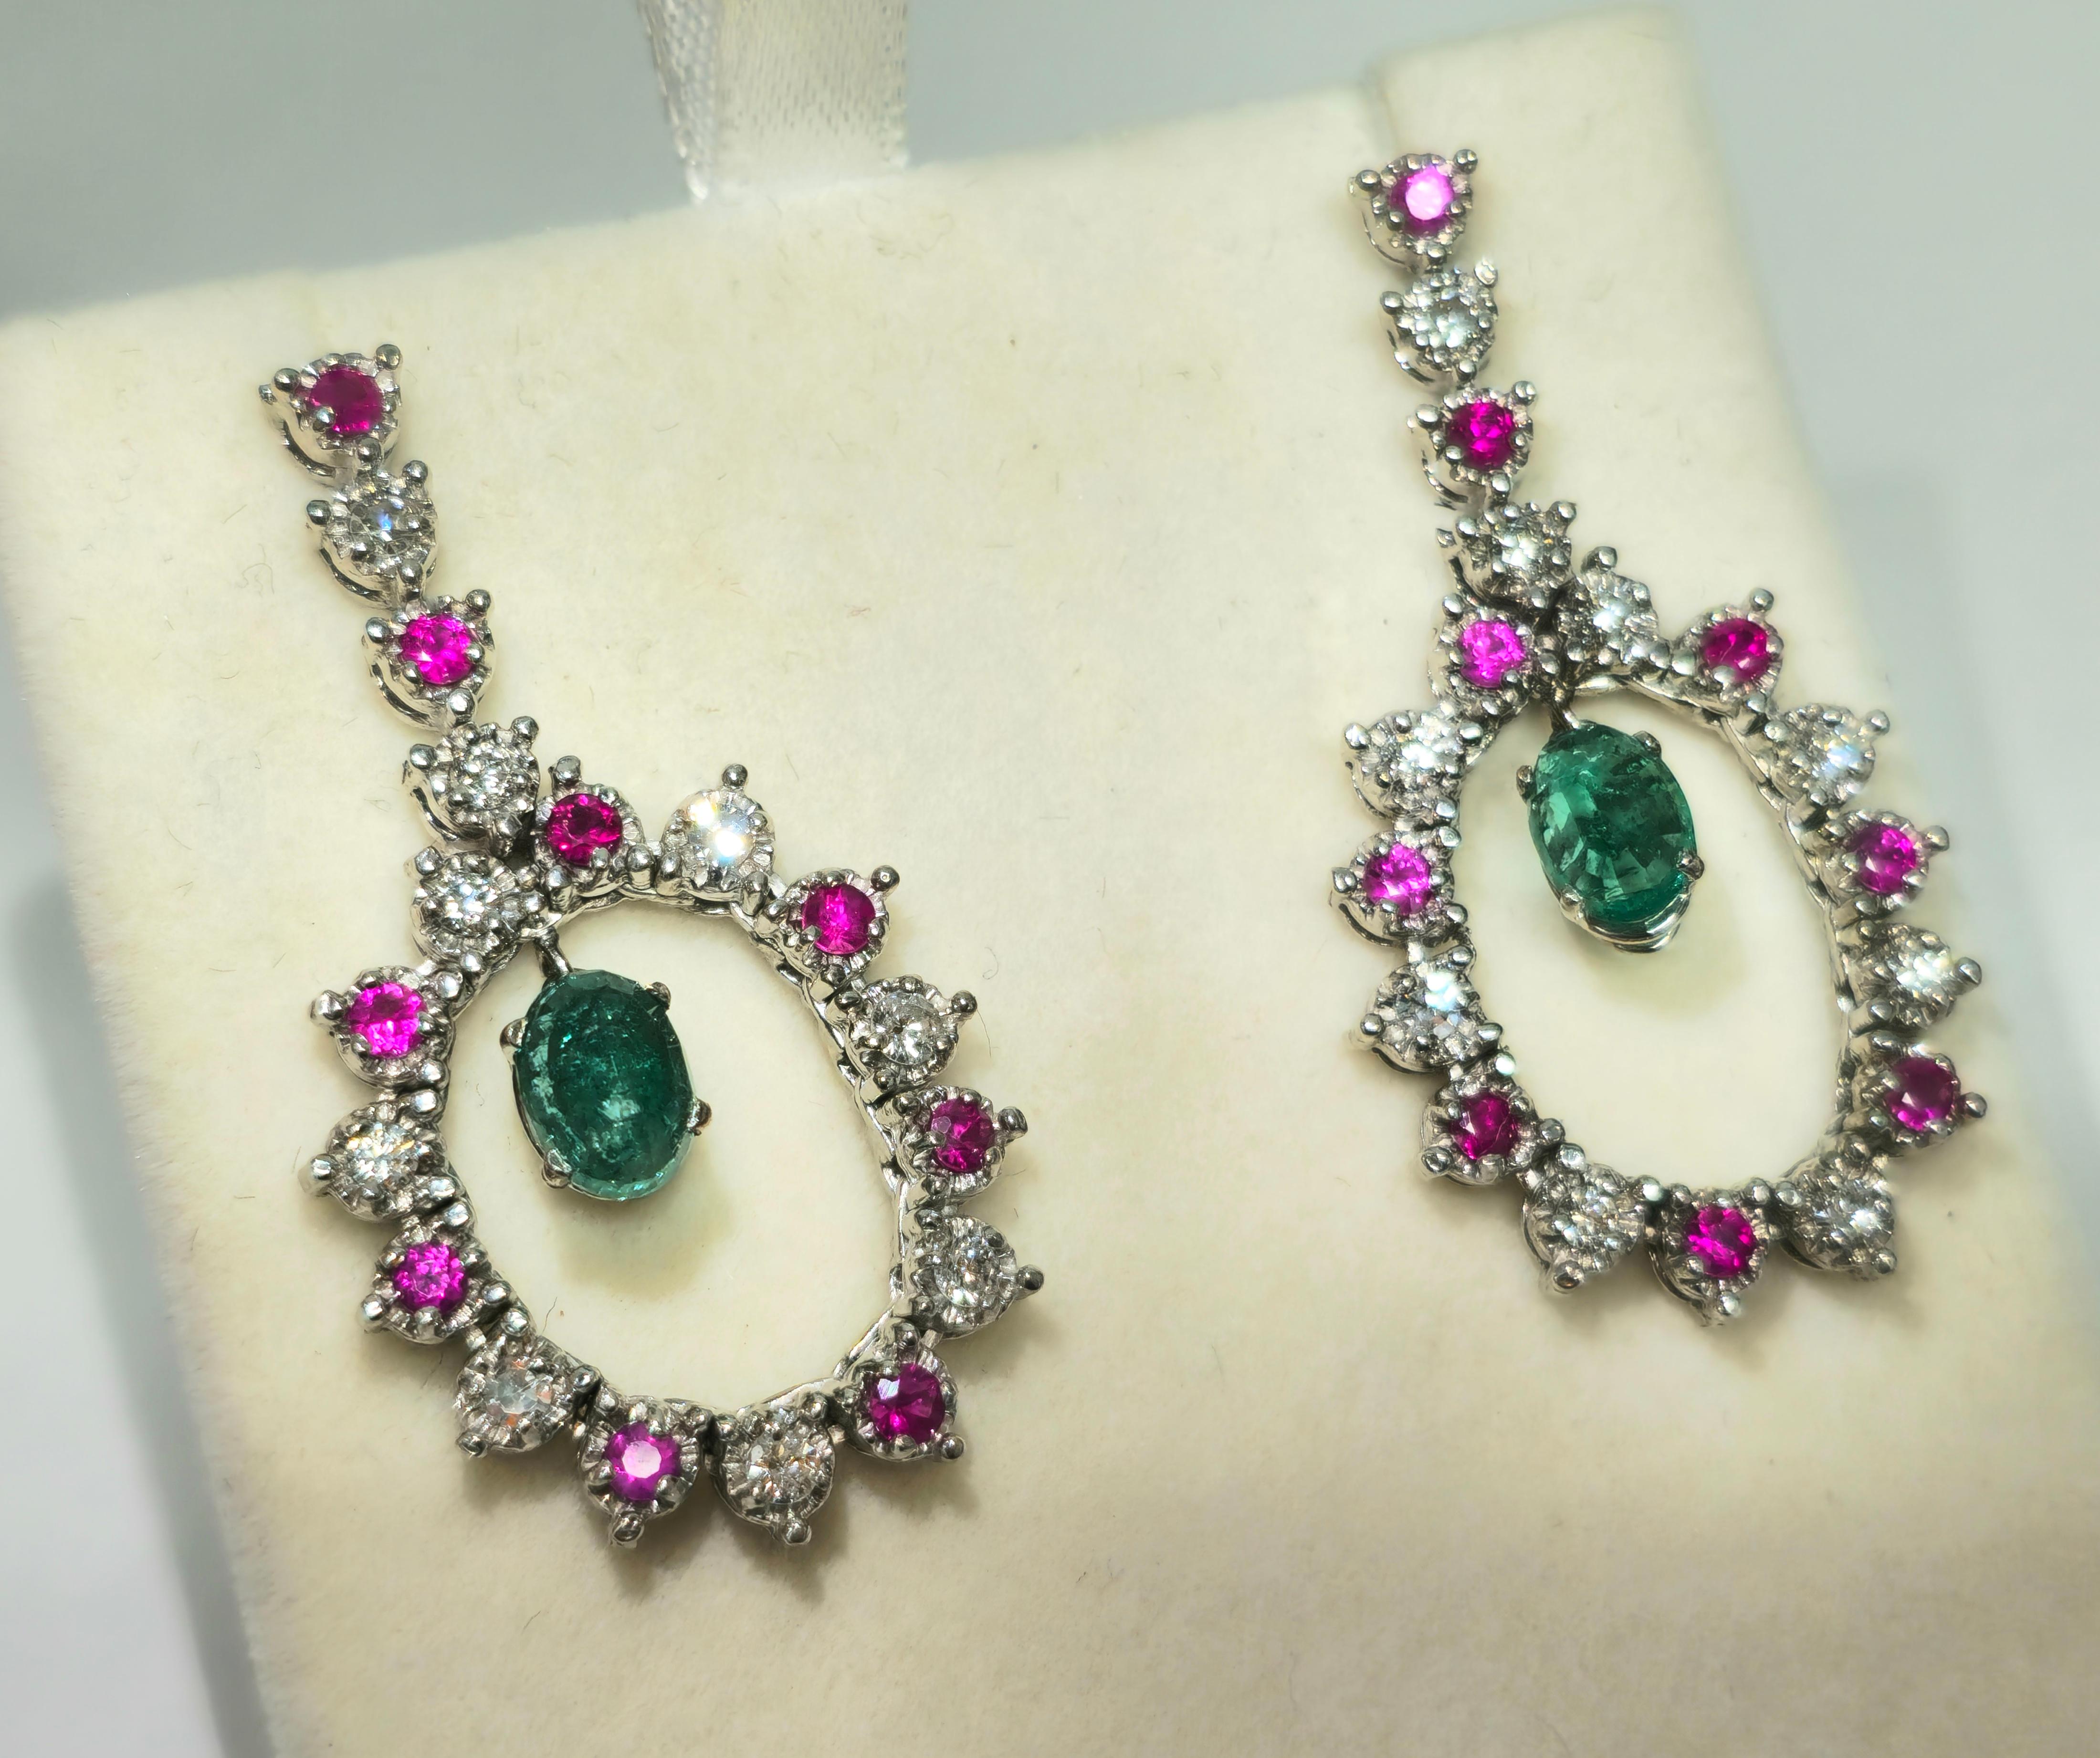 Step into sophistication with our Vintage Style Multi Gemstone Cocktail Earrings, crafted from elegant 14K white gold. Adorned with a stunning 1.00 carat round-cut Burma ruby, a mesmerizing 4.00 carat oval-cut Colombian emerald, and sparkling 1.00